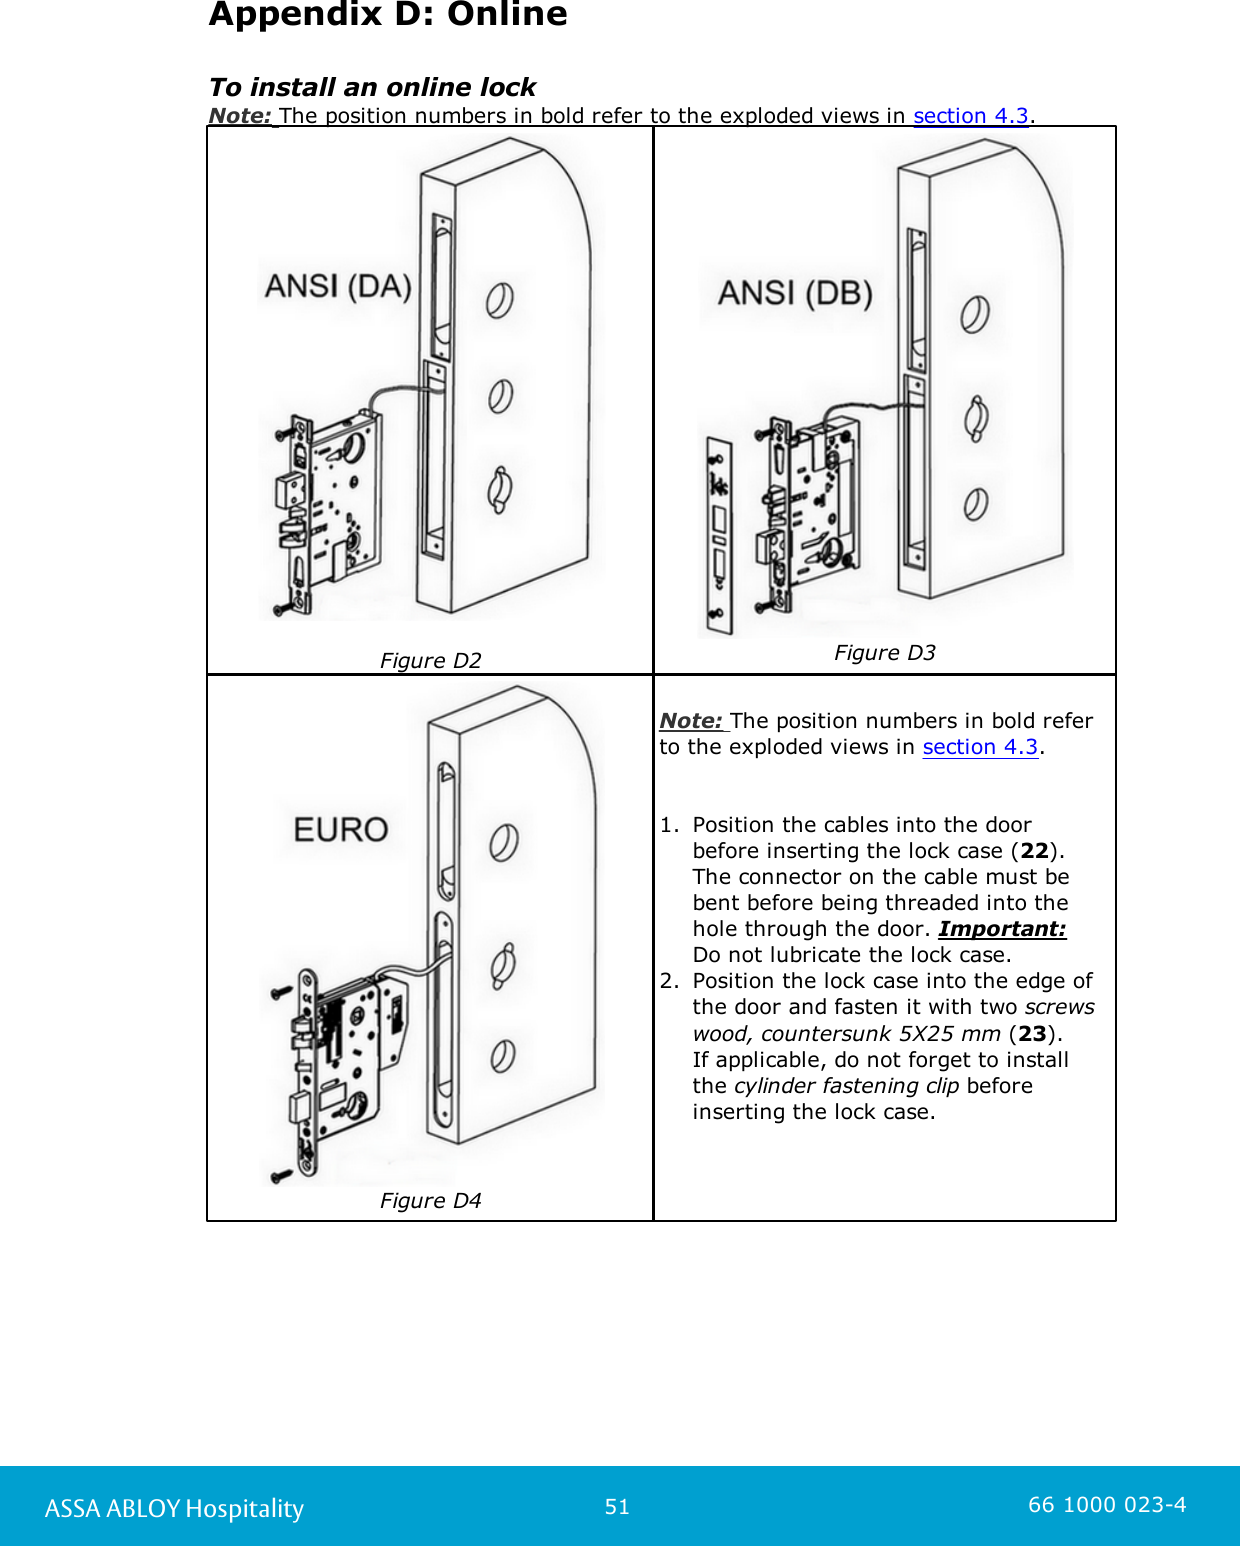 51ASSA ABLOY Hospitality 66 1000 023-4Appendix D: OnlineTo install an online lockNote: The position numbers in bold refer to the exploded views in section 4.3. Figure D2Figure D3Figure D4Note: The position numbers in bold referto the exploded views in section 4.3. 1. Position the cables into the door before inserting the lock case (22). The connector on the cable must bebent before being threaded into thehole through the door. Important: Do not lubricate the lock case. 2. Position the lock case into the edge ofthe door and fasten it with two screwswood, countersunk 5X25 mm (23). If applicable, do not forget to installthe cylinder fastening clip beforeinserting the lock case. 